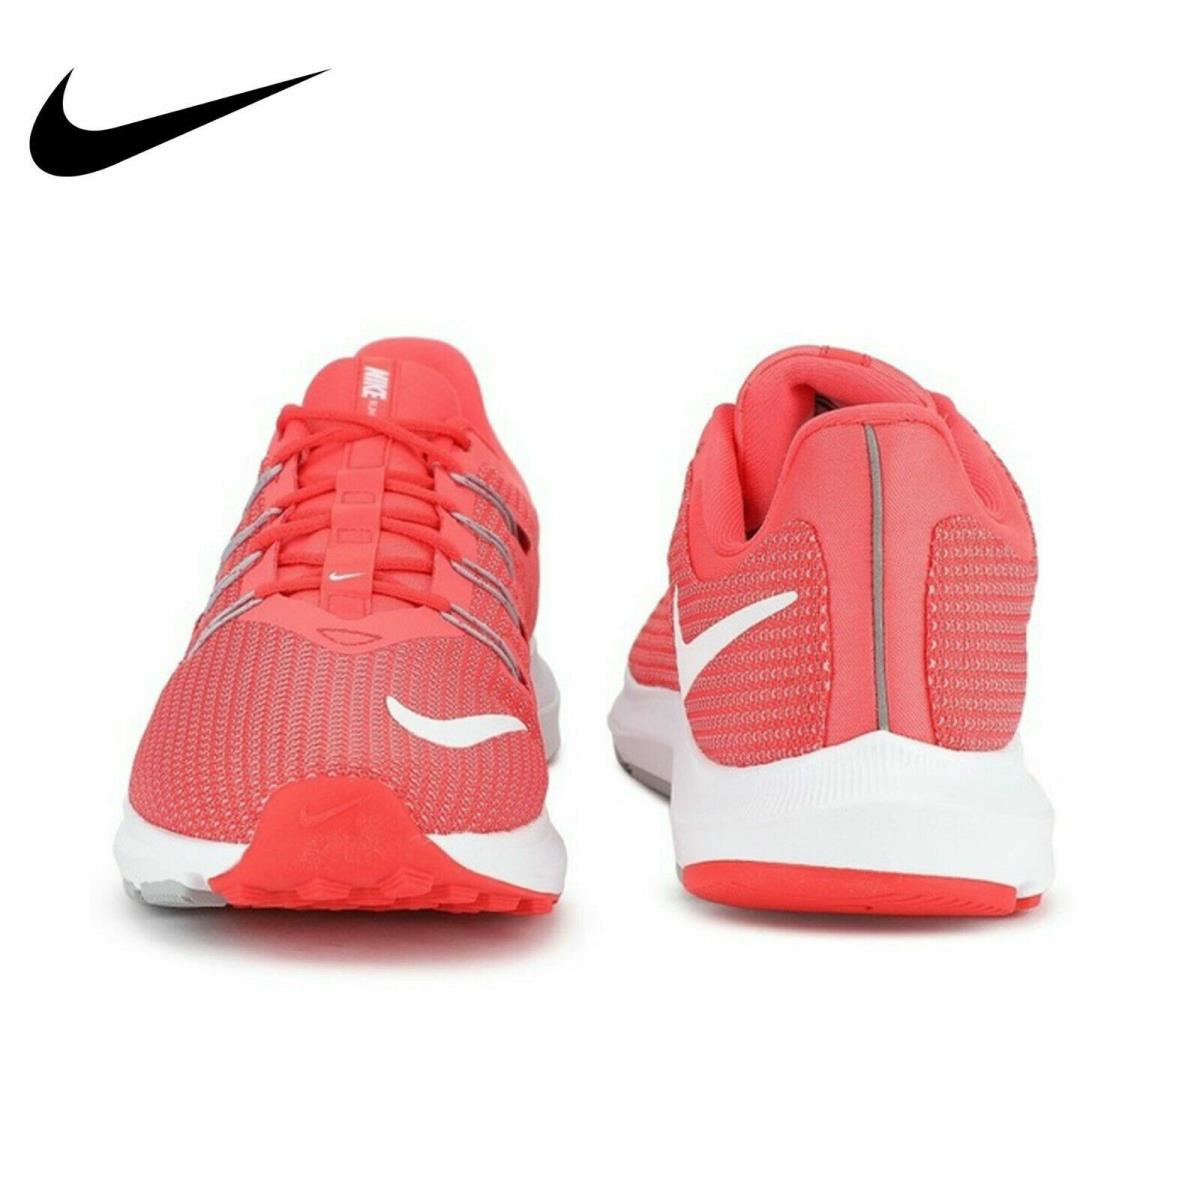 Nike shoes Quest - Red 3